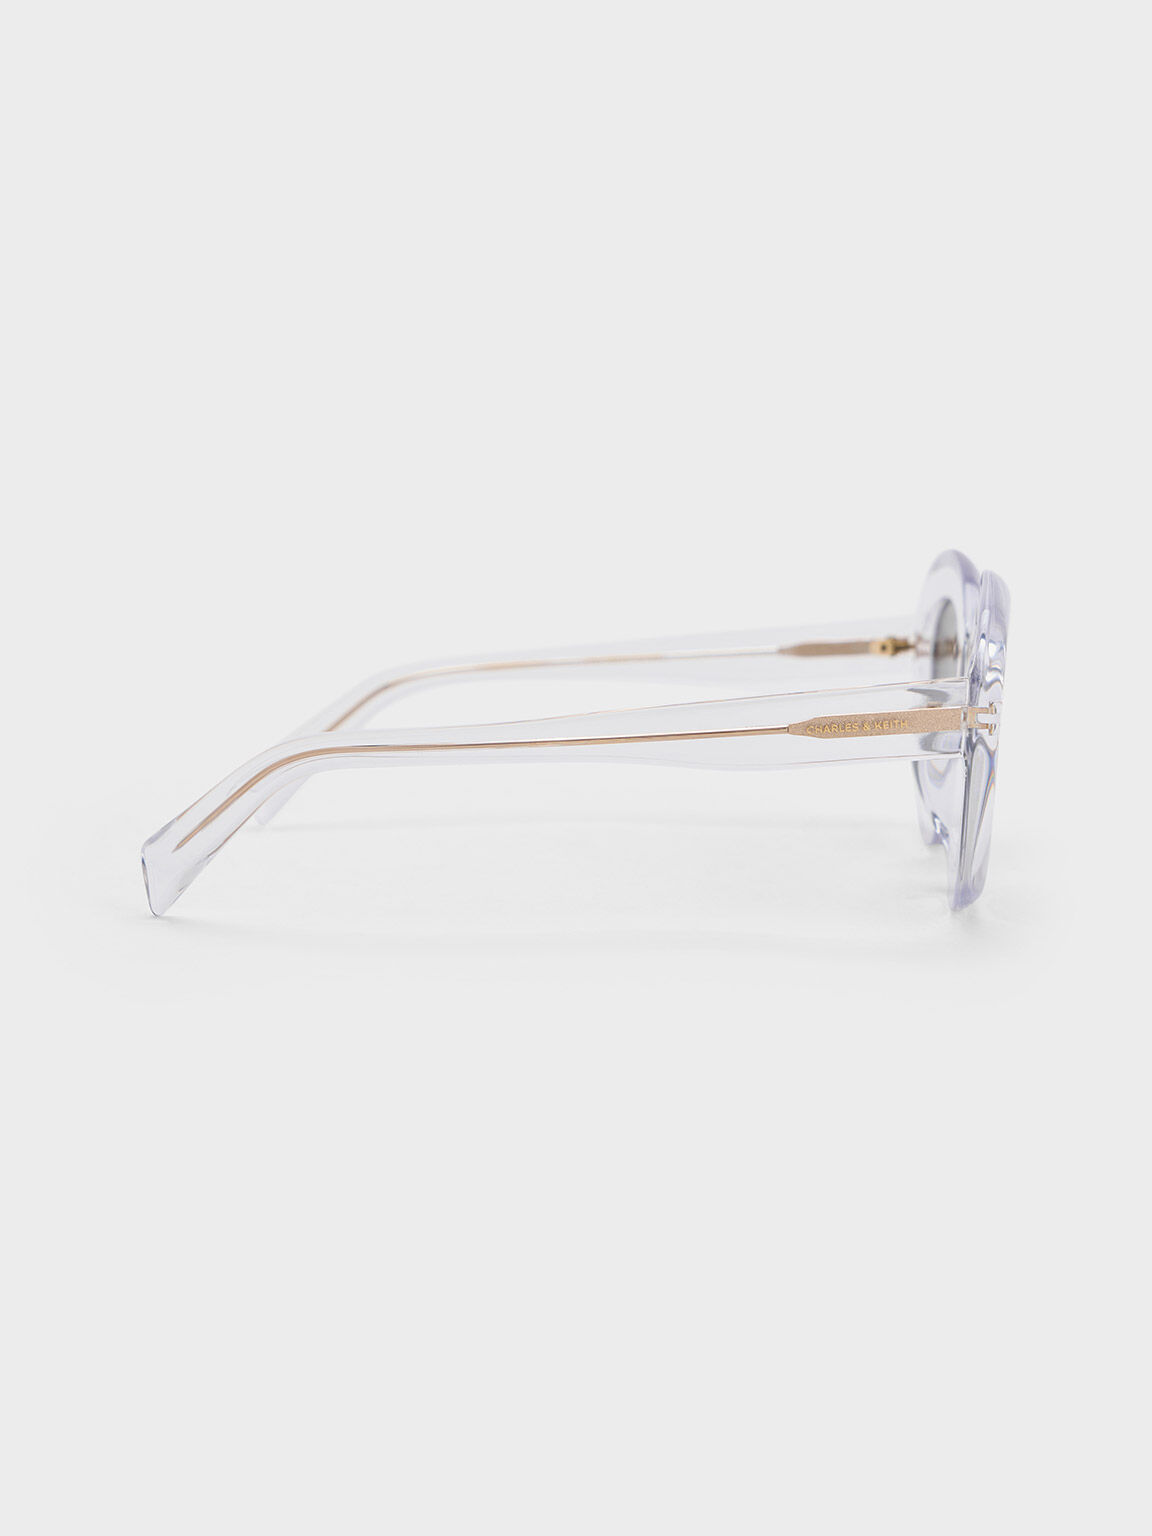 Recycled Acetate Cateye Sunglasses, Clear, hi-res